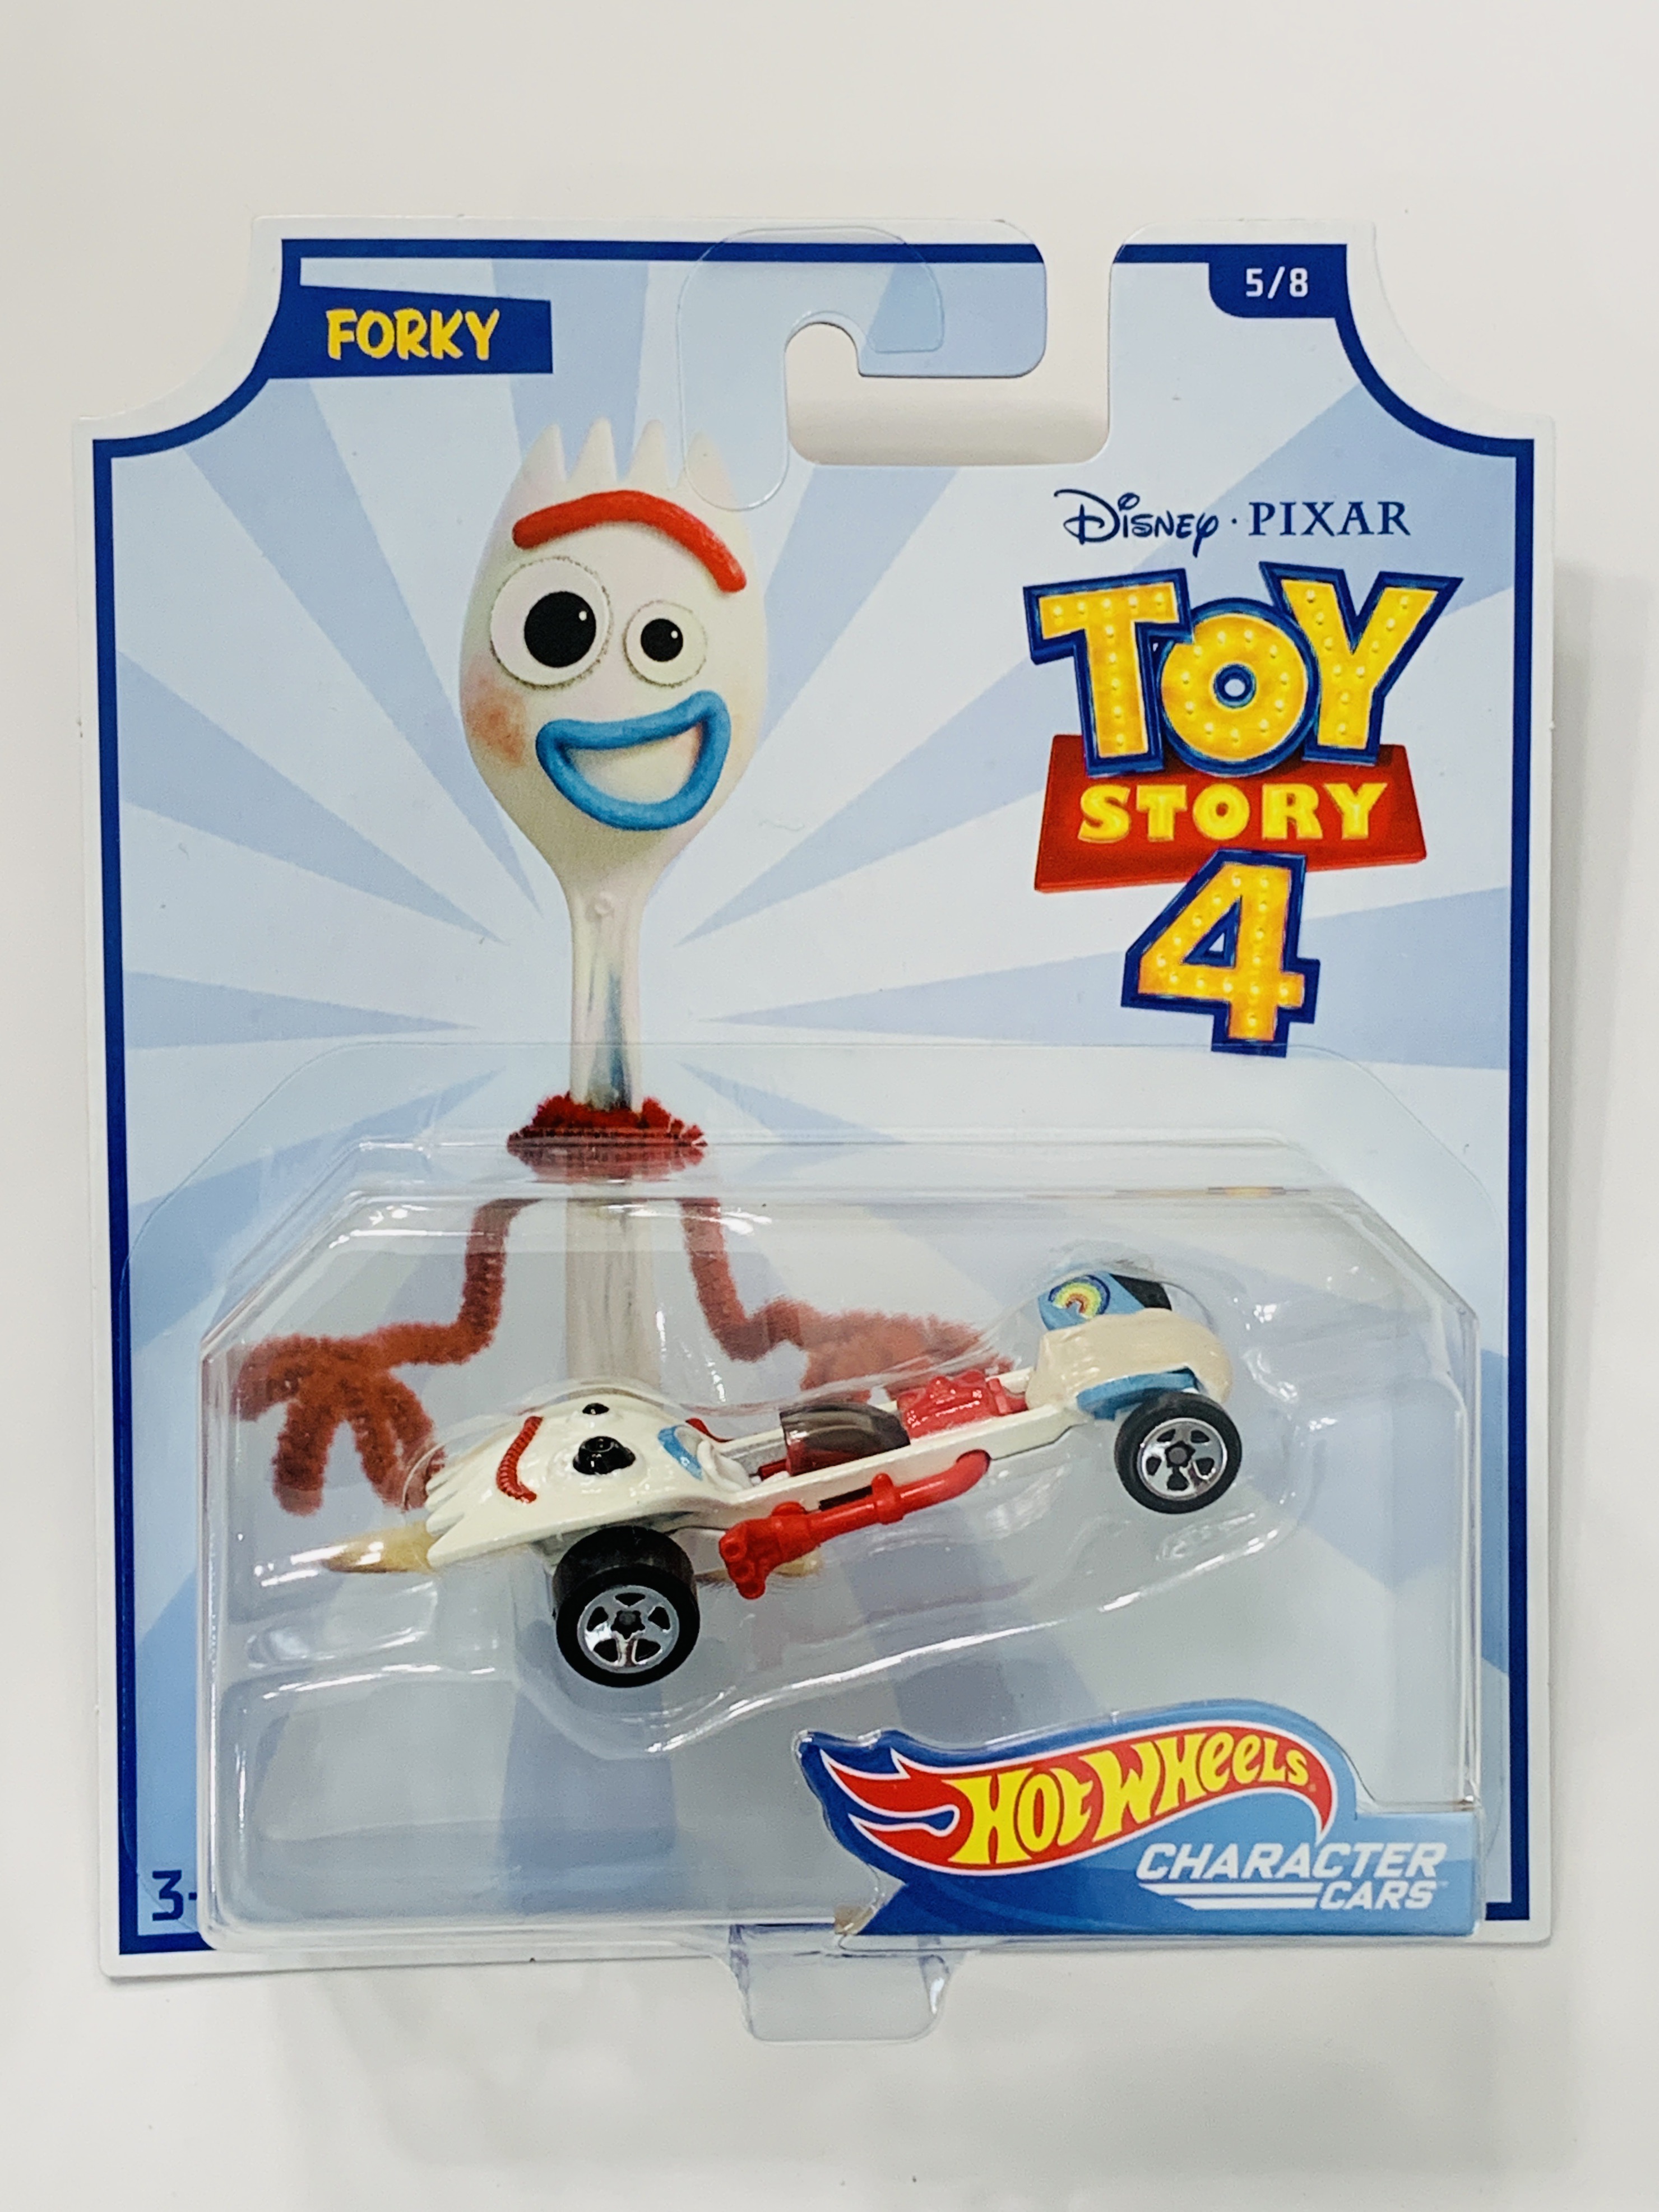 Hot Wheels Character Cars Disney Pixar Toy Story 4 Forky